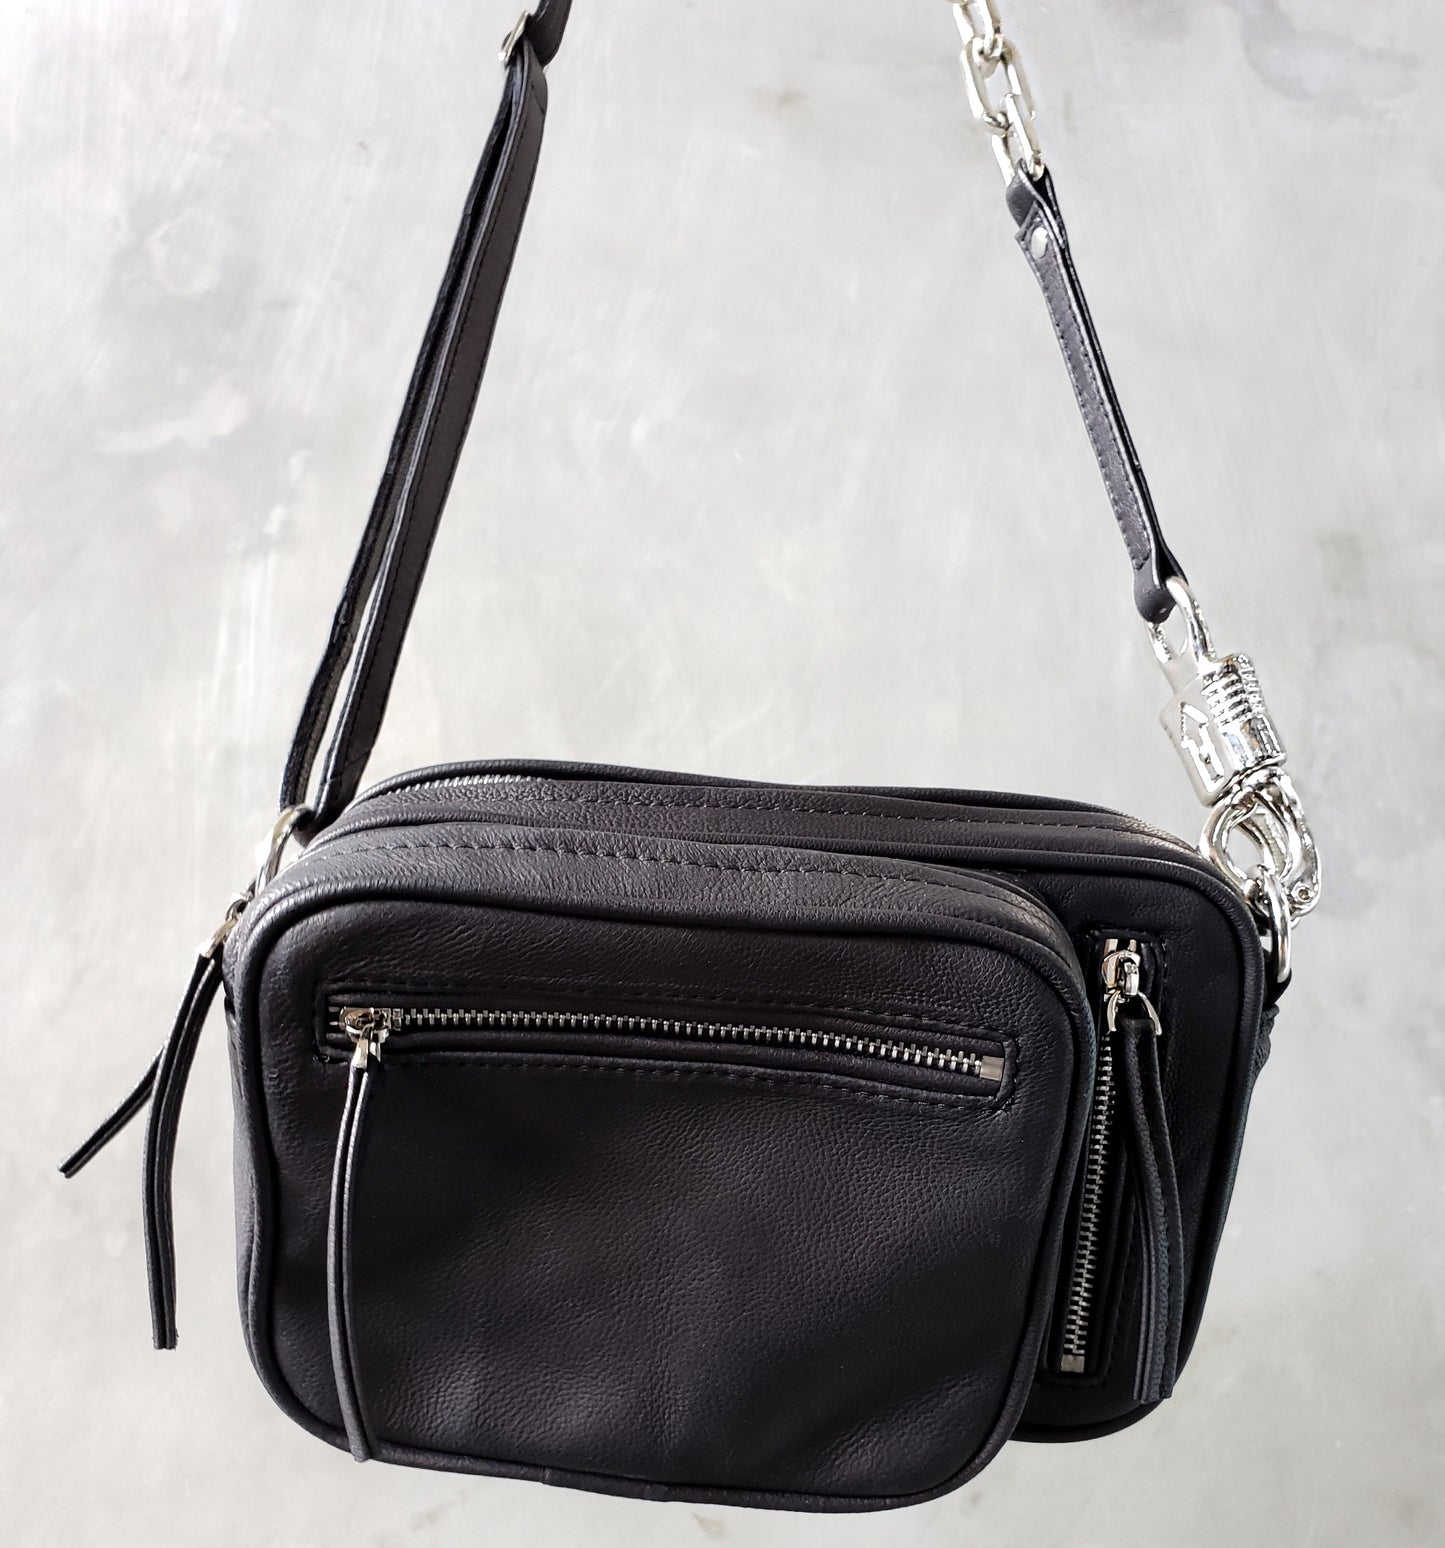 The Panic Bag - Convertible Black Leather Shoulder Bag w/ Heavy Duty Hardware and Chain